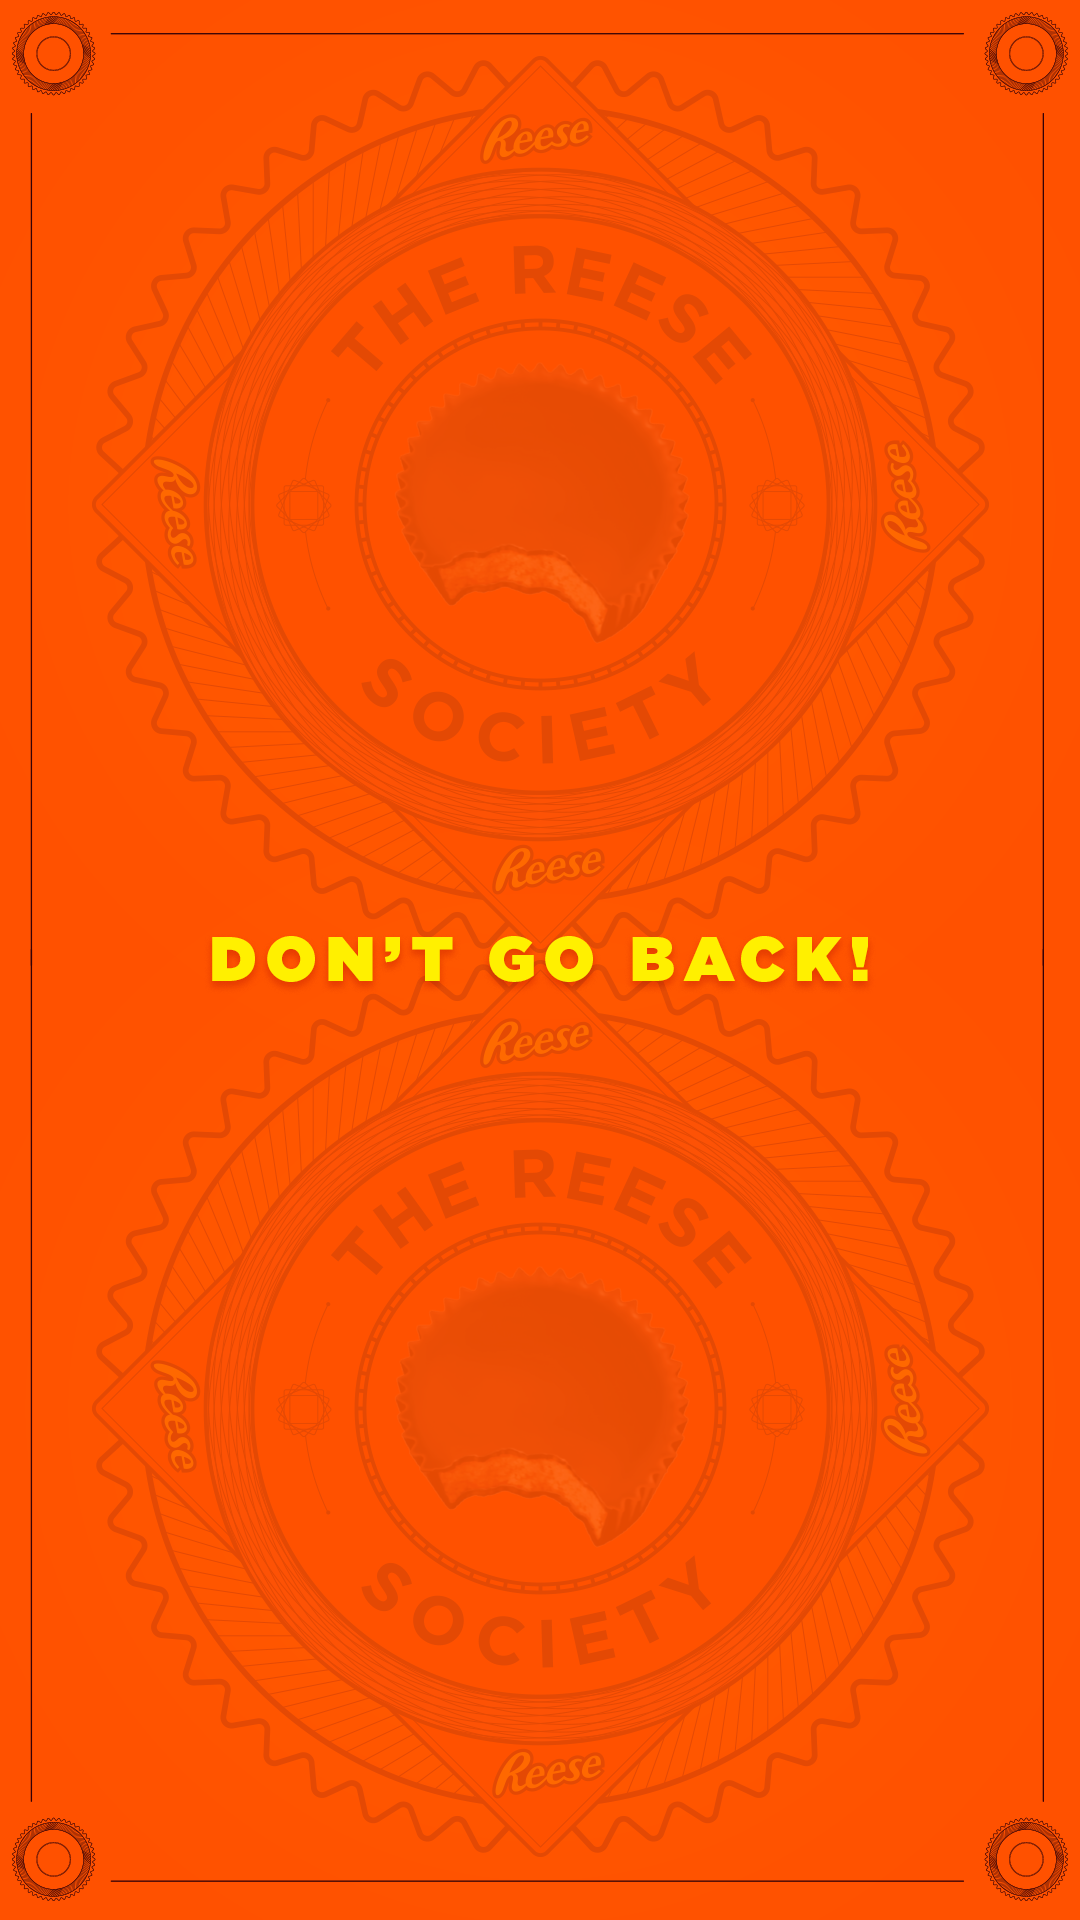 Reese-Society-IG_0095_Don’t-go-back.png